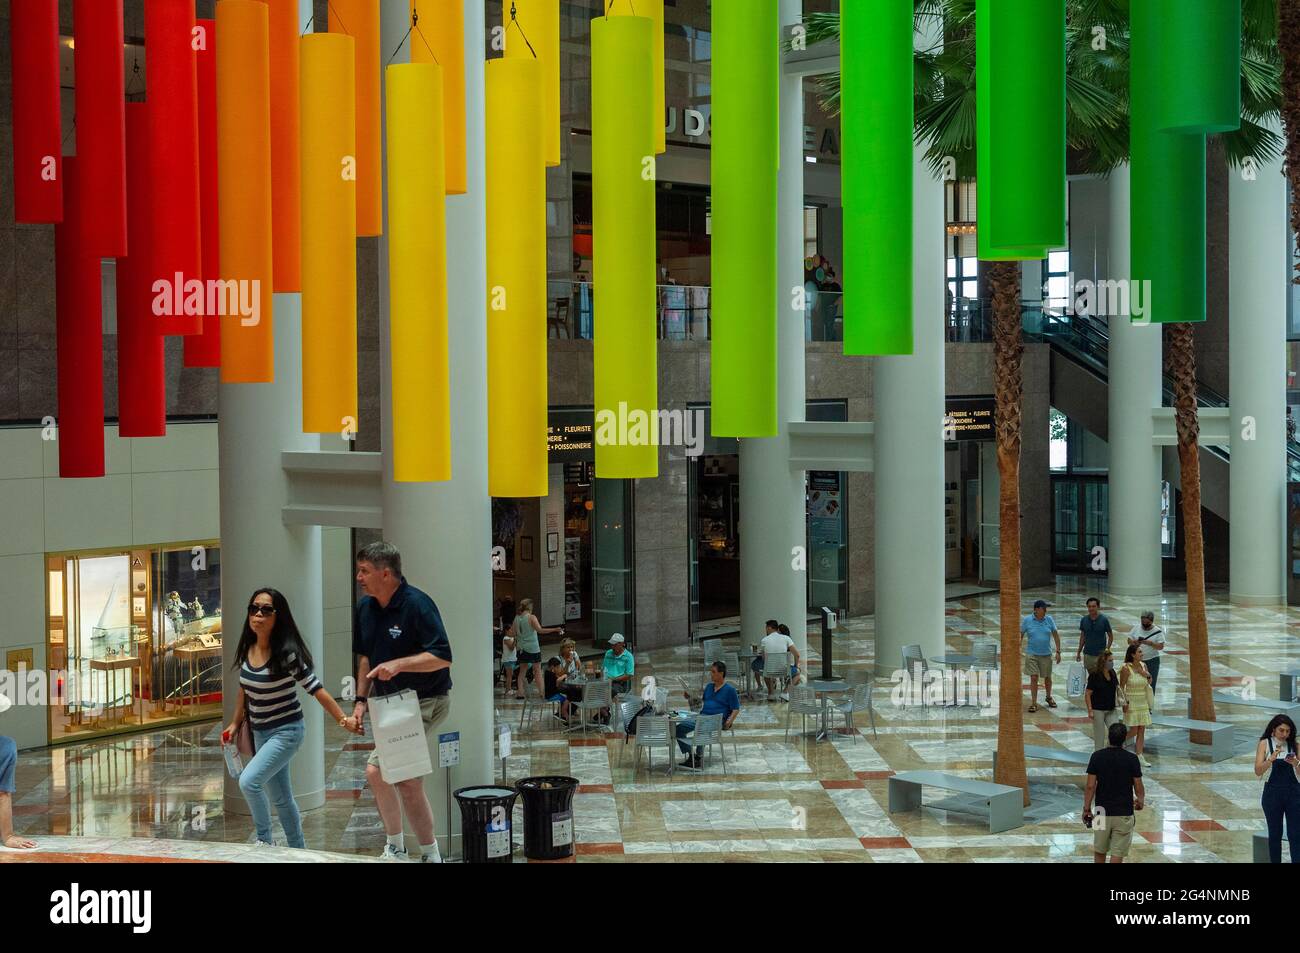 In celebration of Pride Week visitors view the installation “Radiance” in Brookfield Place in New York on Saturday, June 19, 2021.  (© Richard B. Levine) Stock Photo